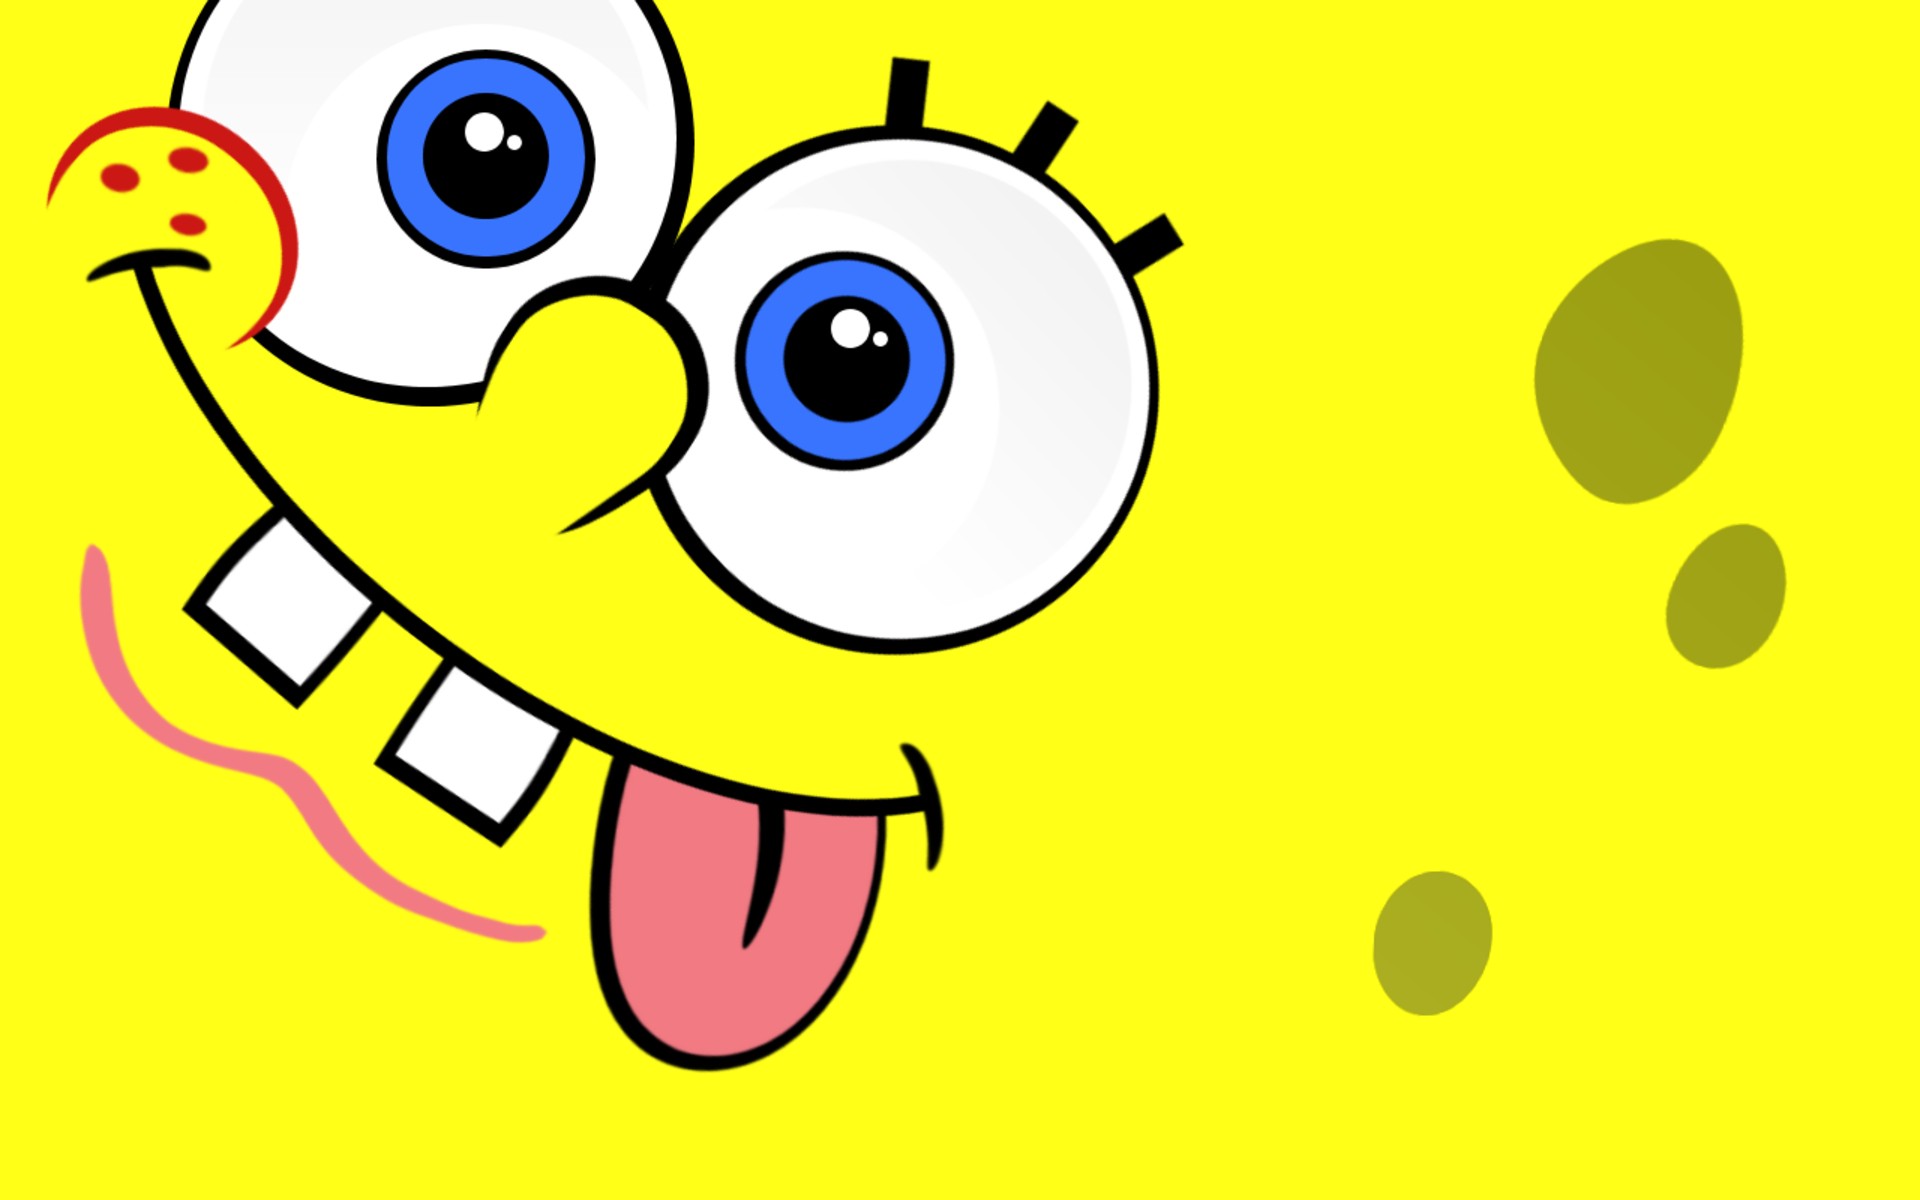 Spongebob wallpaper ·① Download free awesome High Resolution wallpapers ...